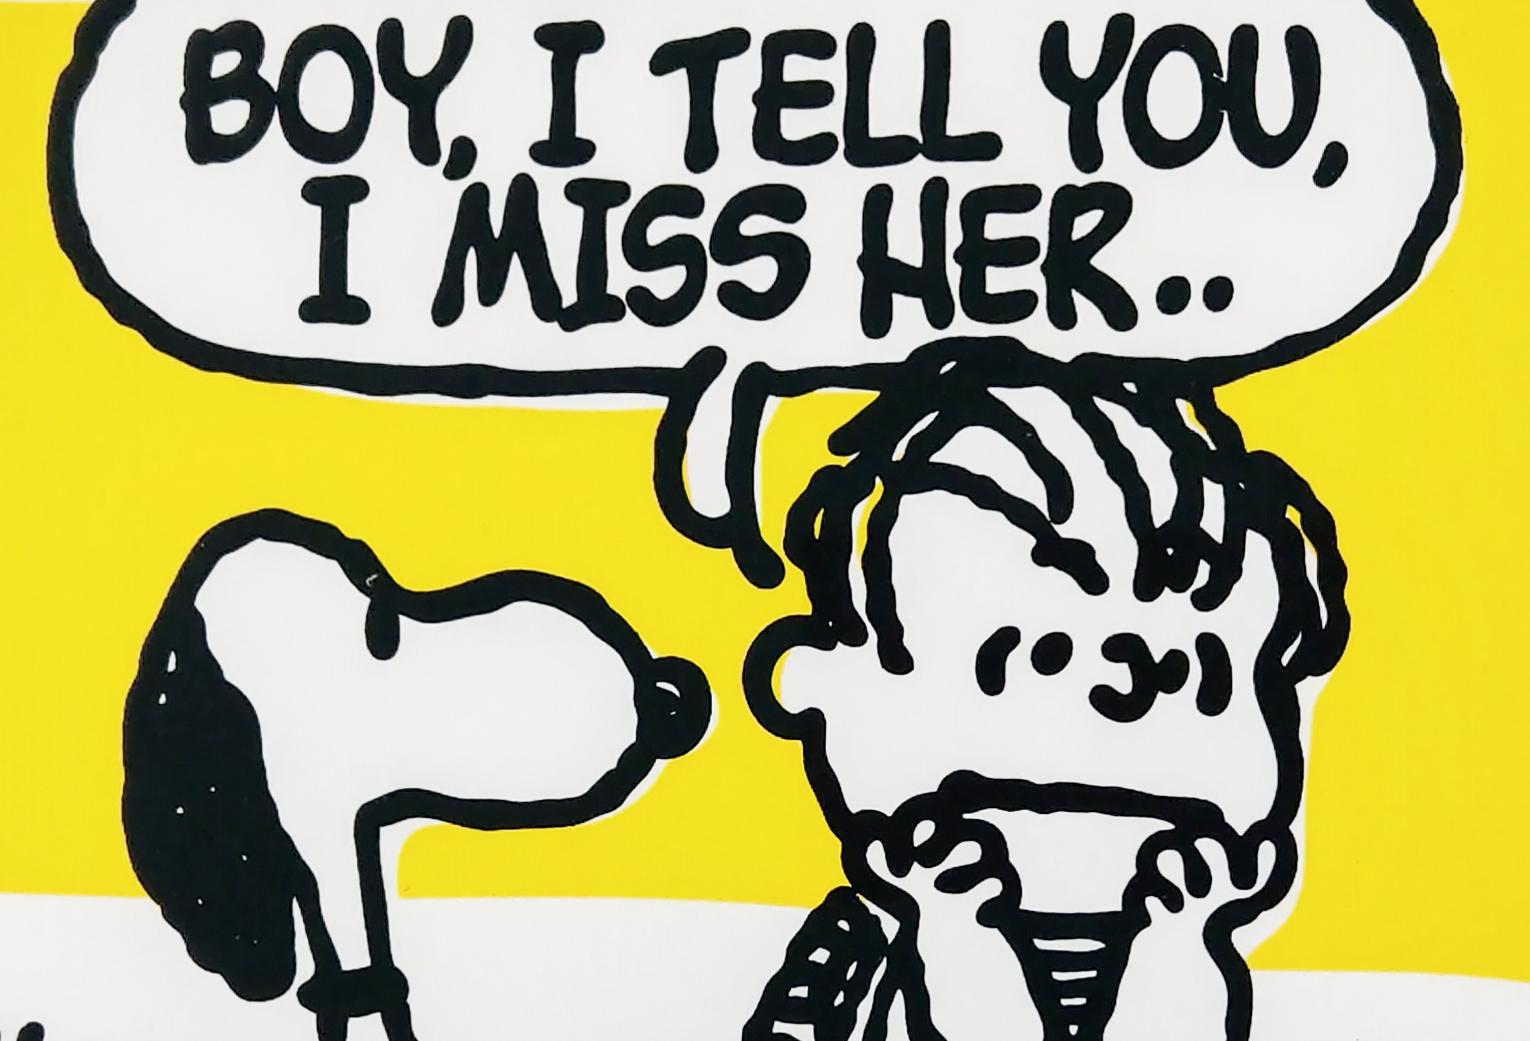 Mark Drew, Boy I Tell You I  Miss Her, comes from a limited edition of 150. This contemporary print is inspired from 